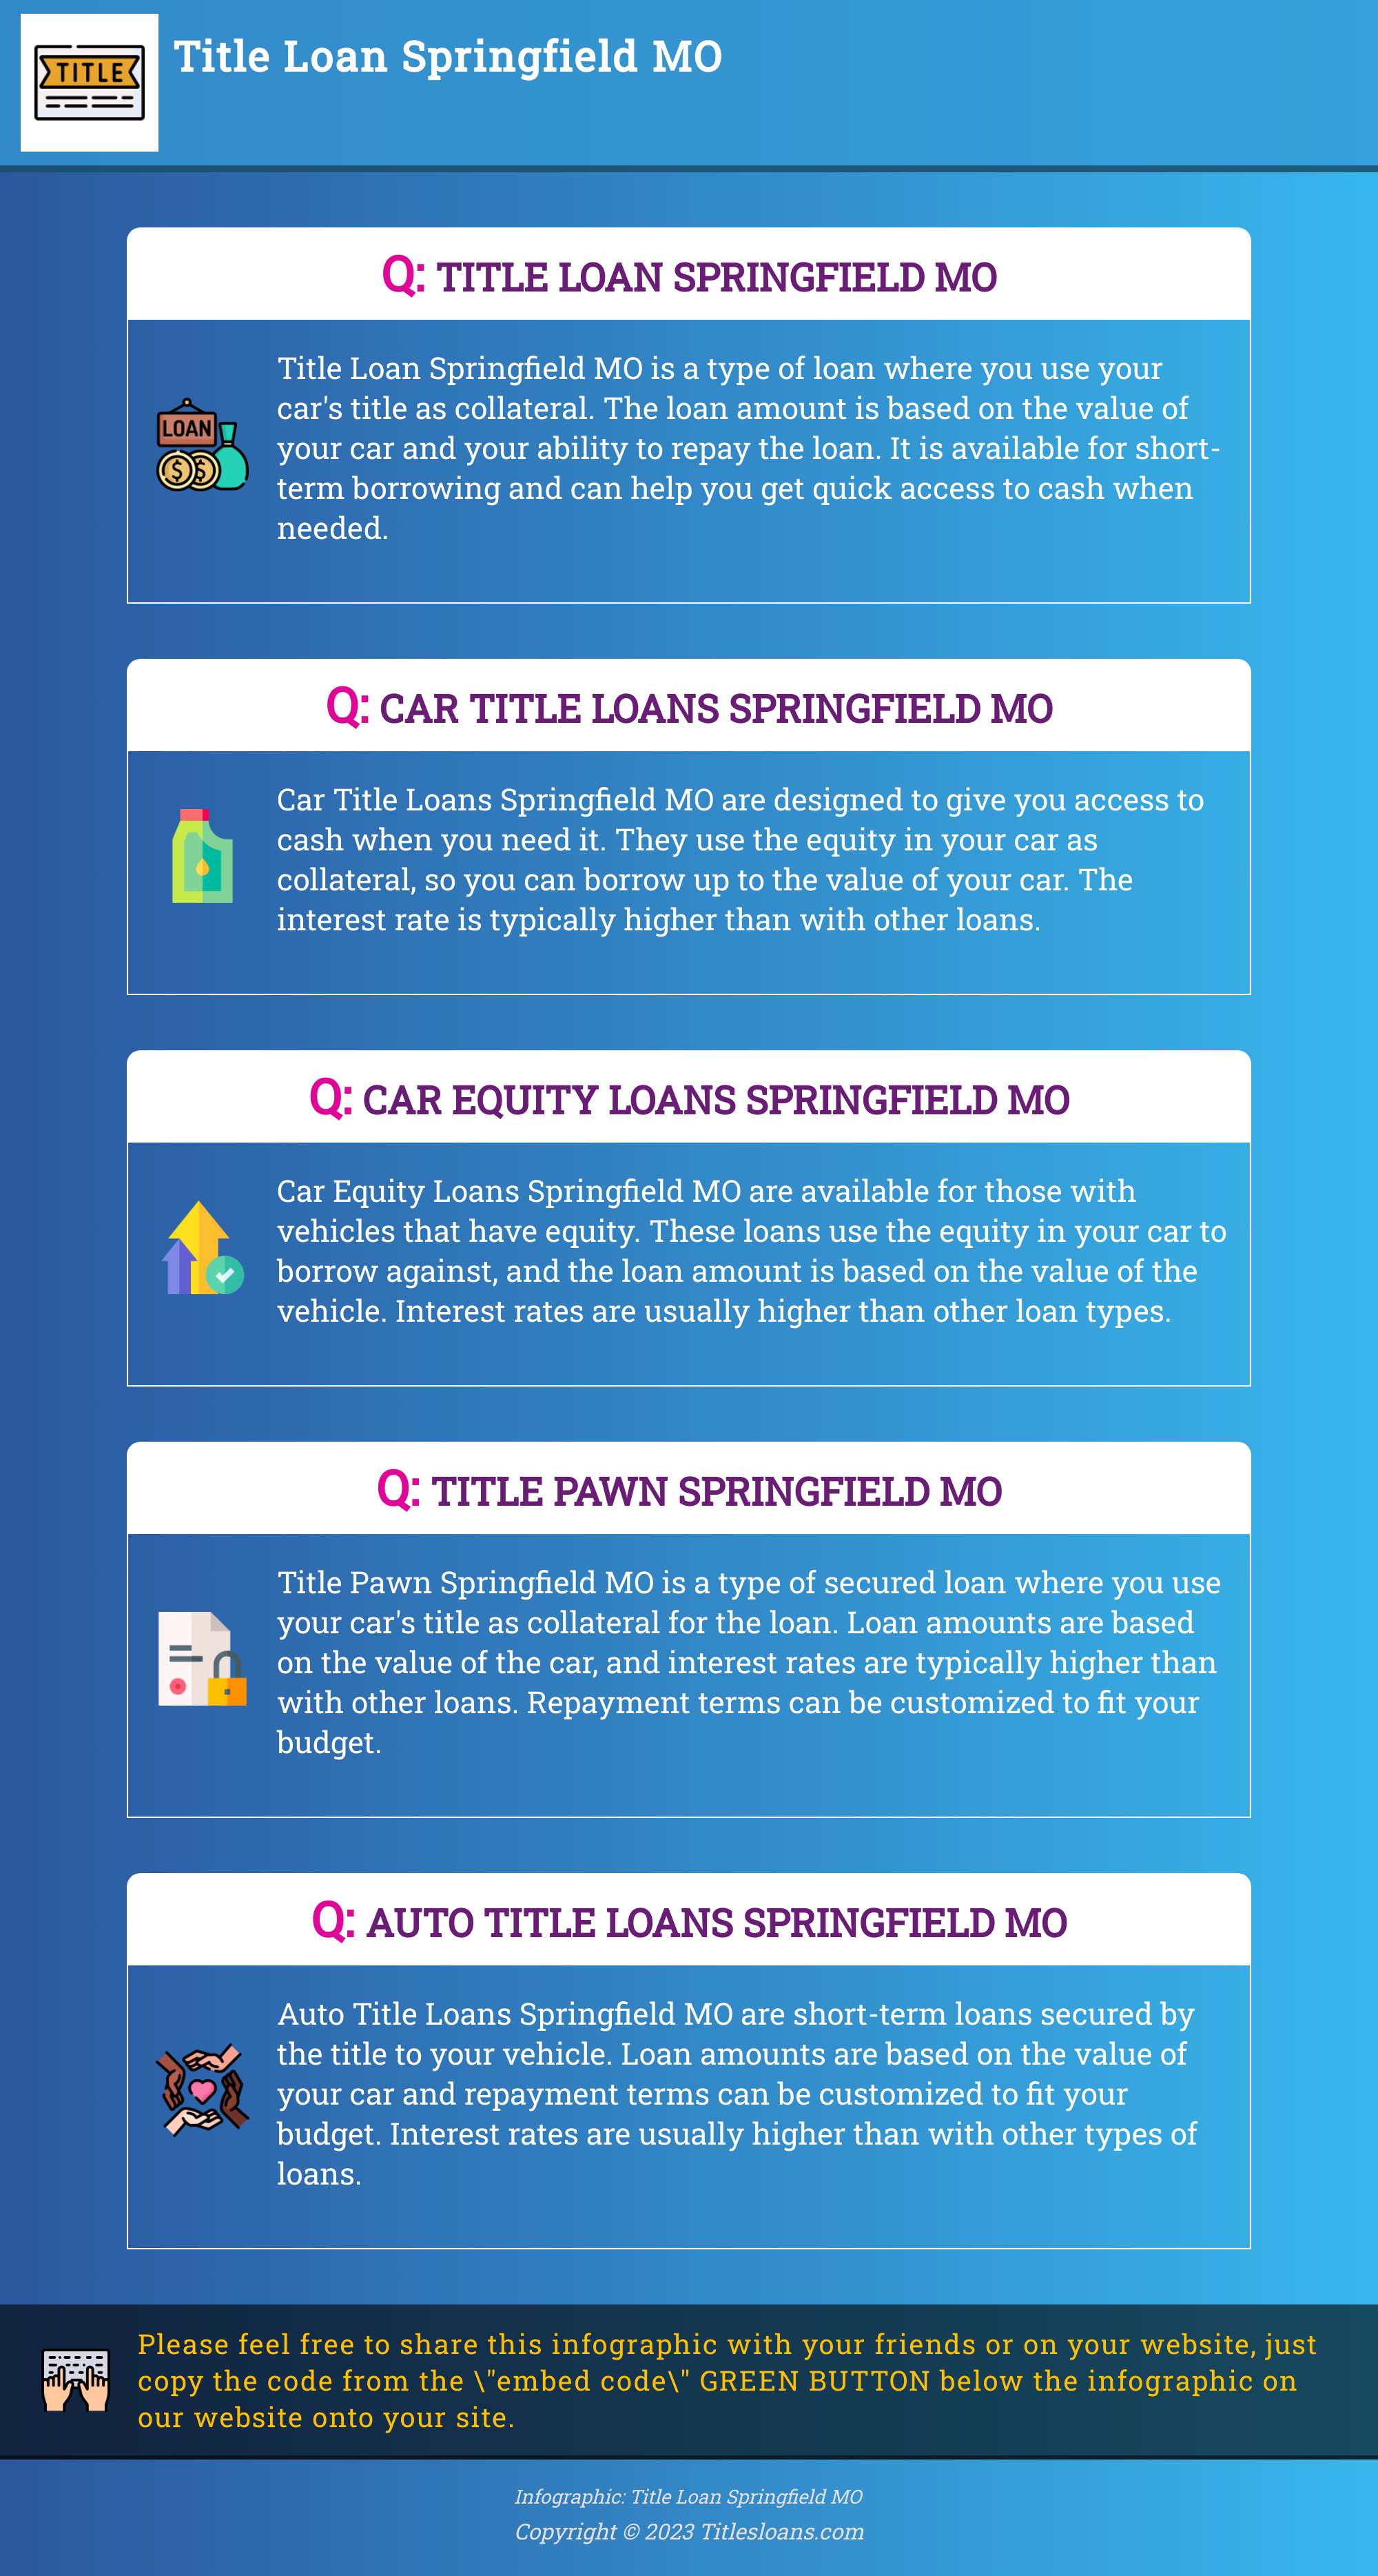 Infographic: Title Loan Springfield MO  